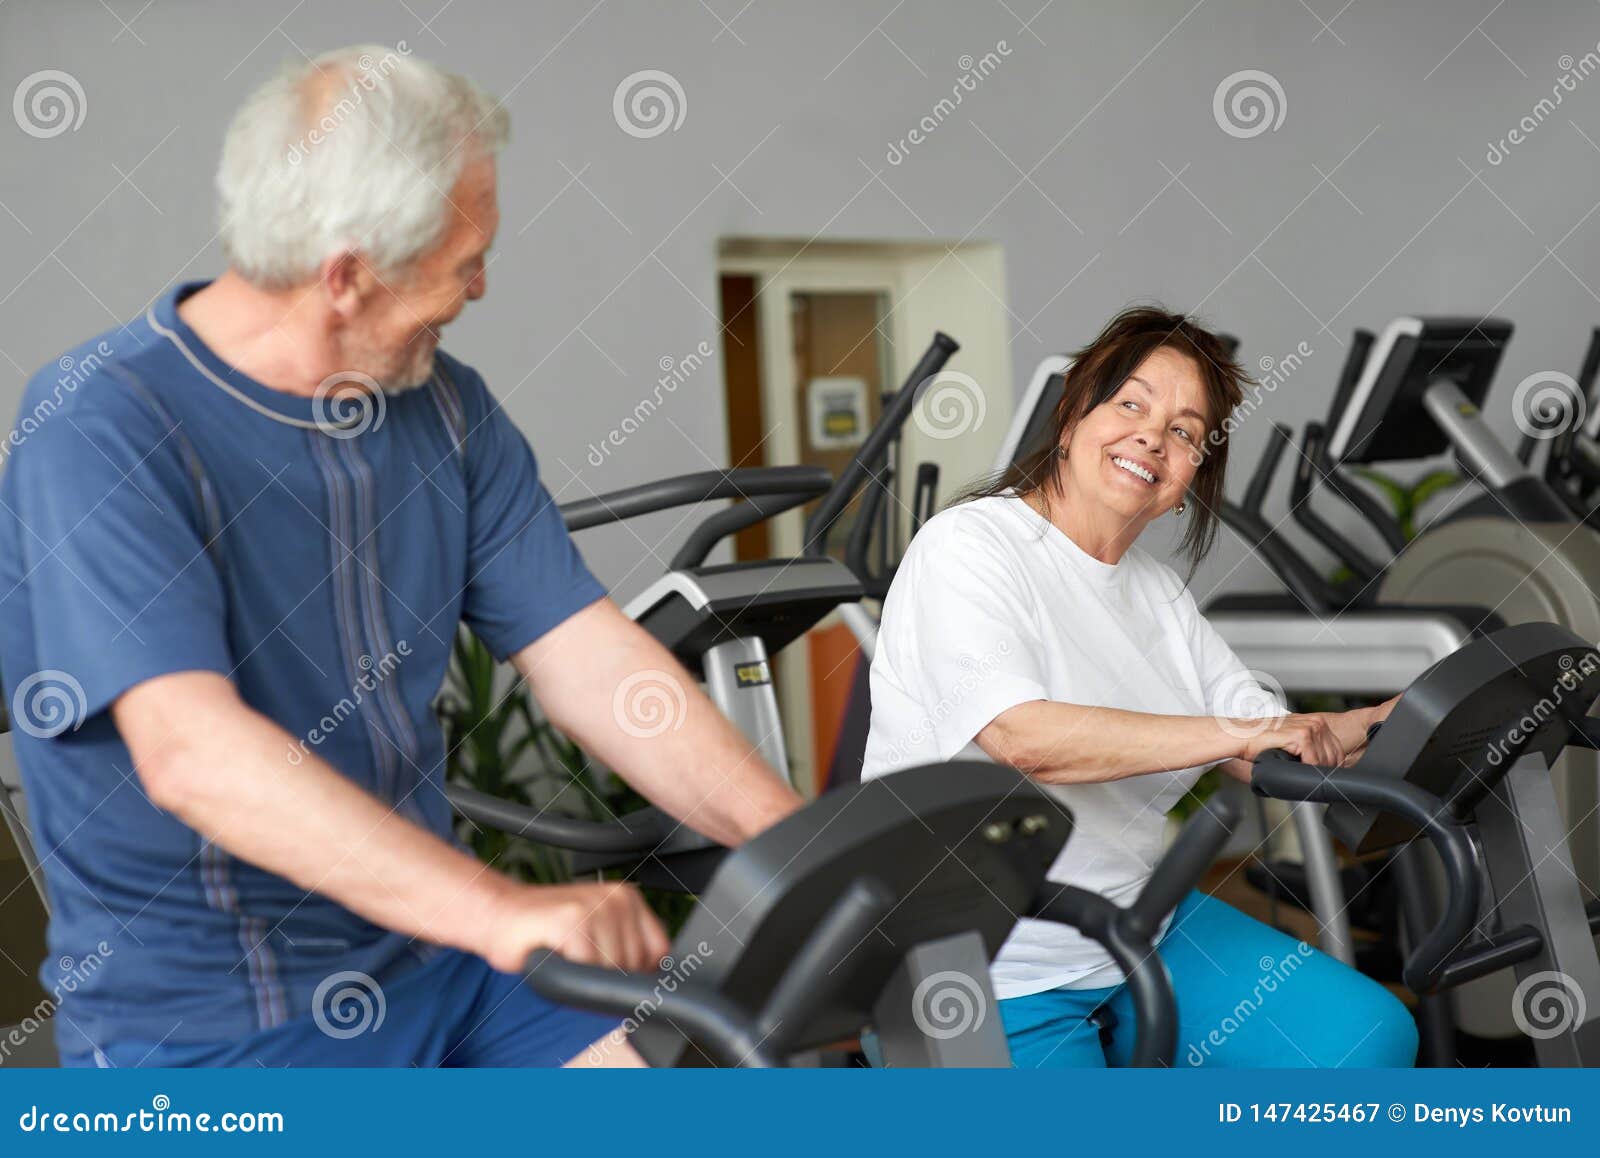 Beautiful Couple of Seniors Working Out at Gym. Stock Image